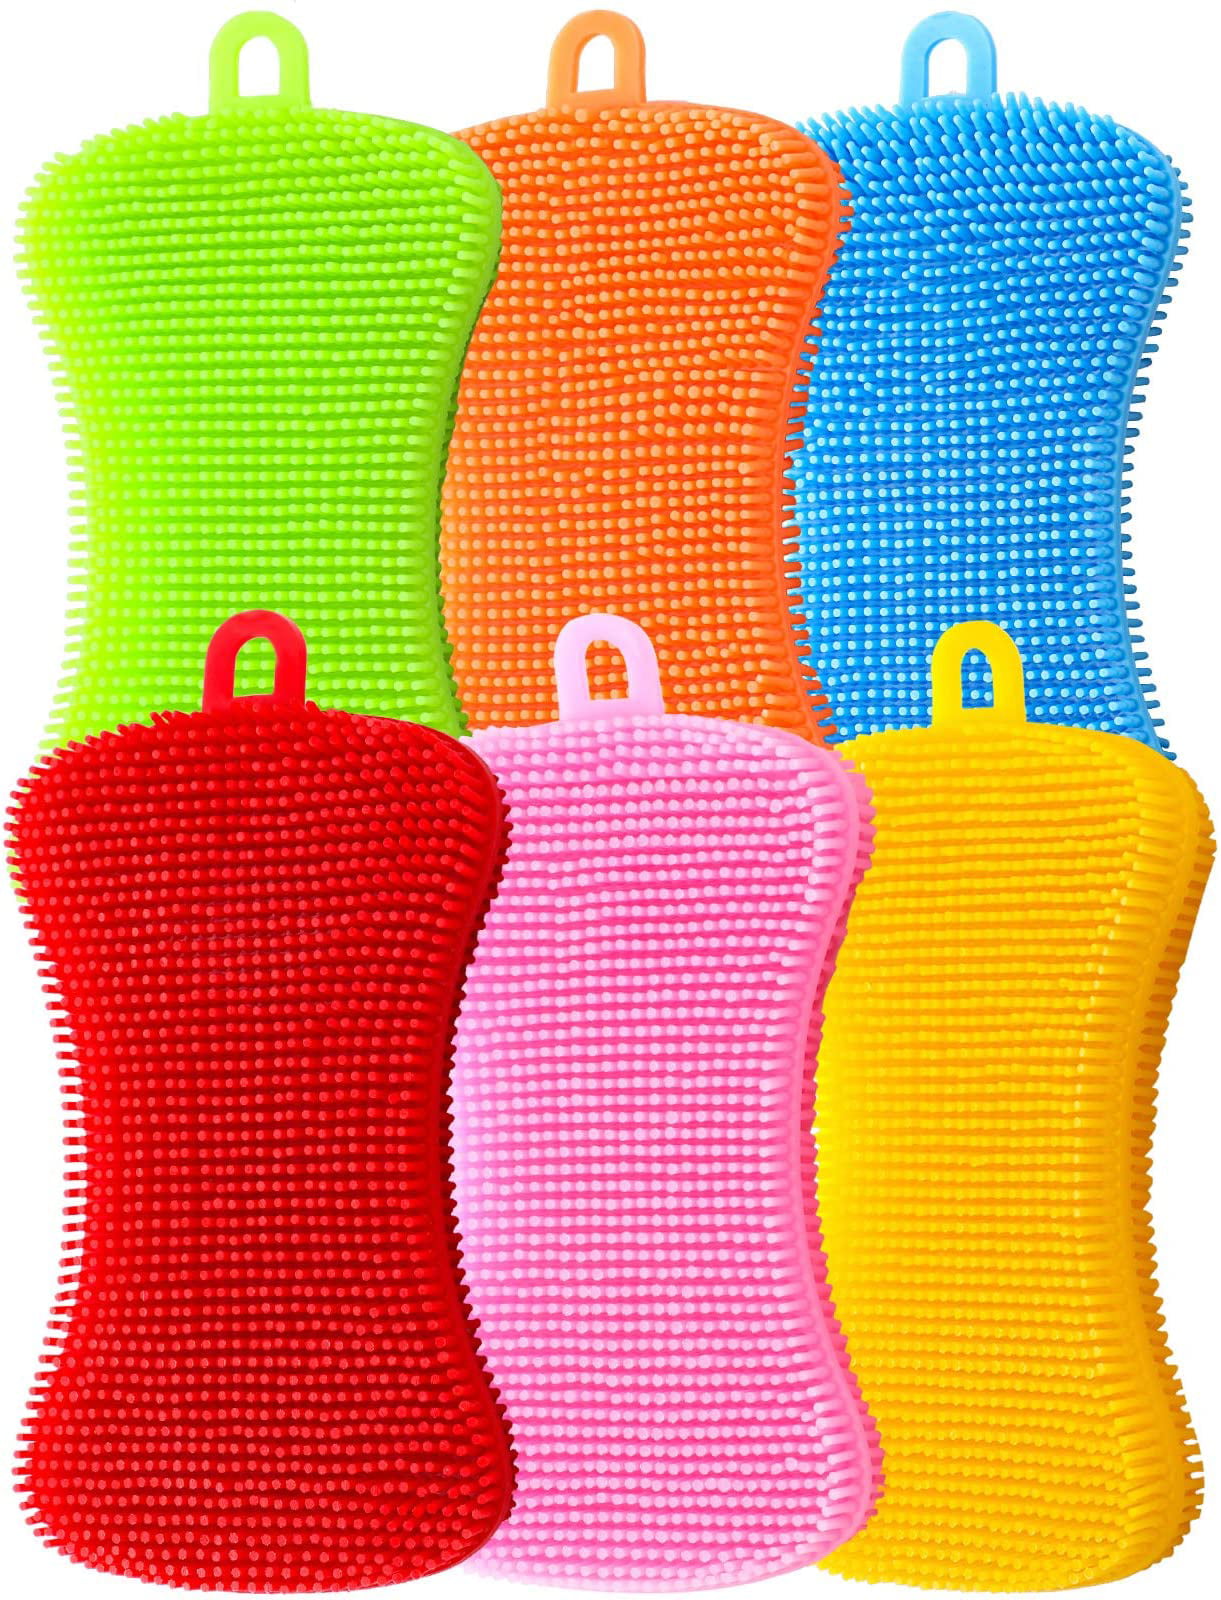 6 X Silicone Dish Washing Sponge Scrubber Kitchen Cleaning 